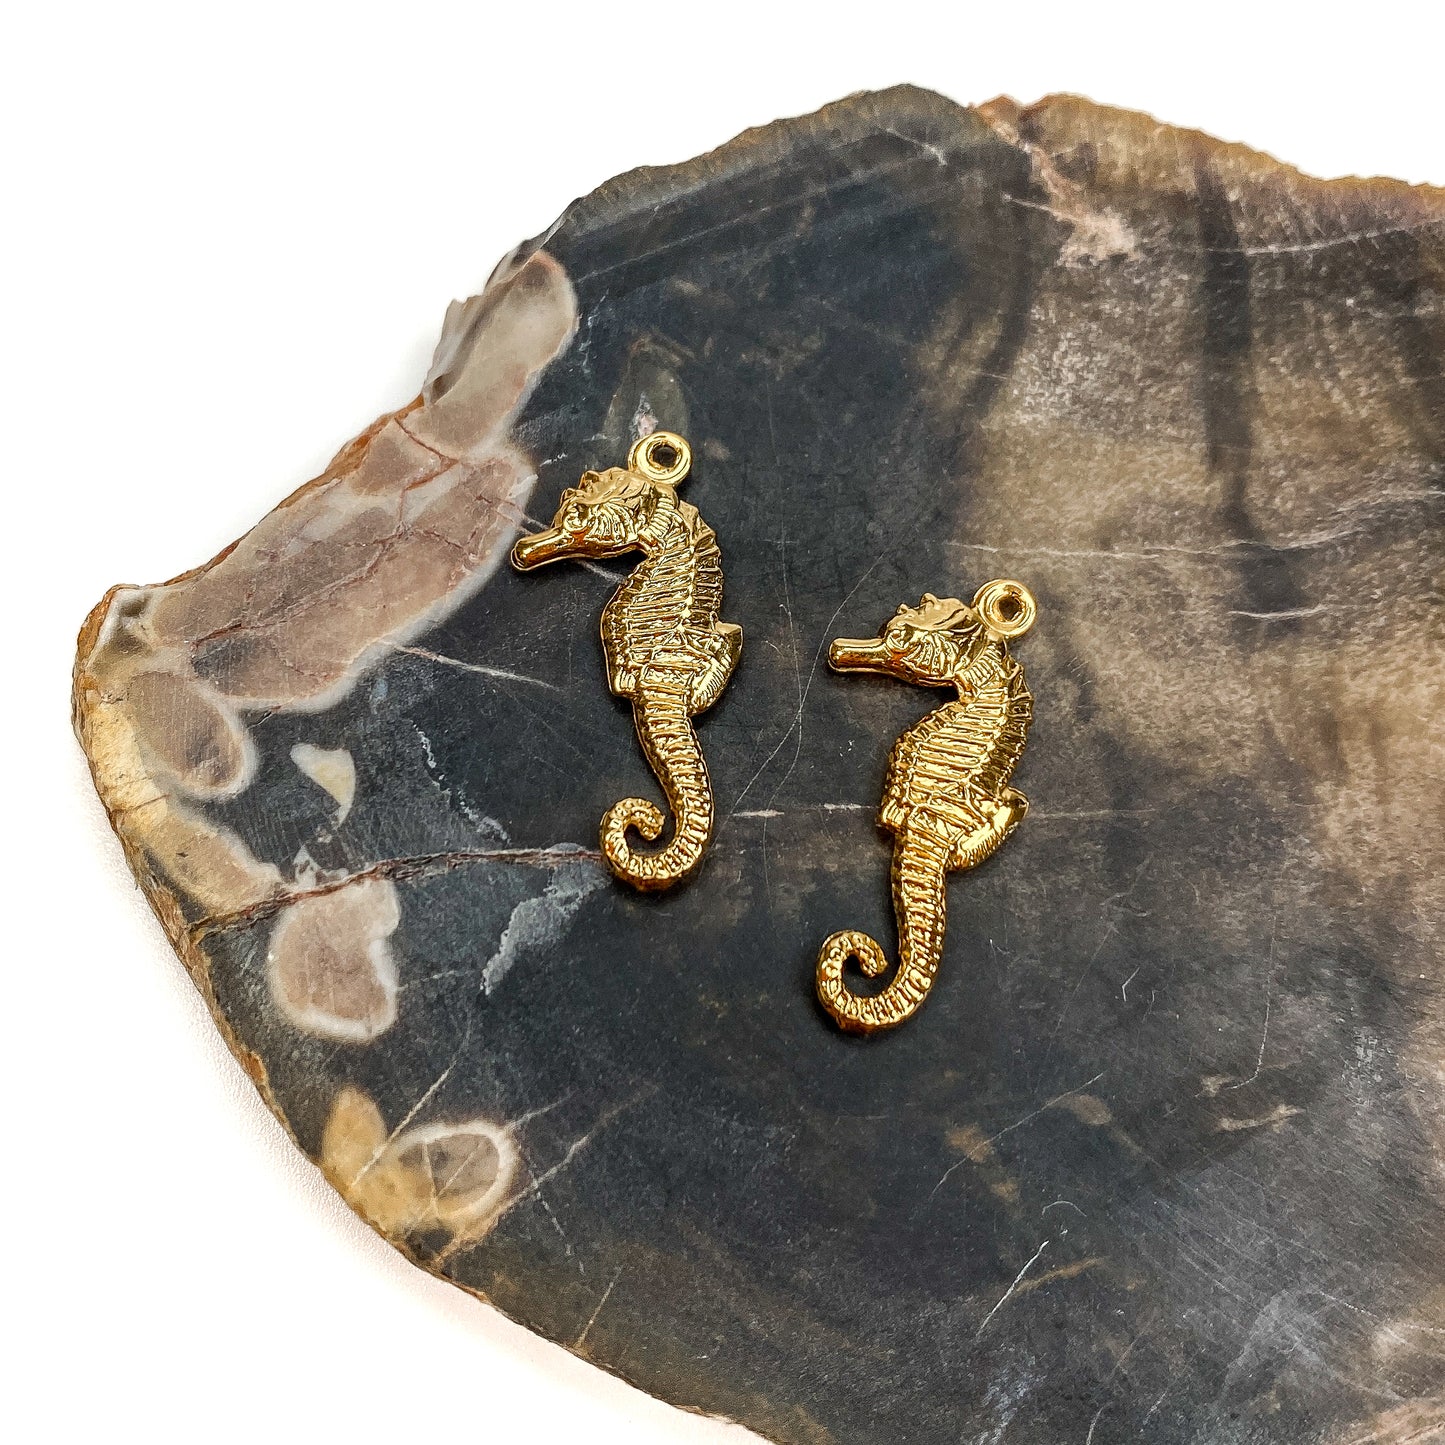 Seahorse Charm (24k Gold Plated) - 1 pc.